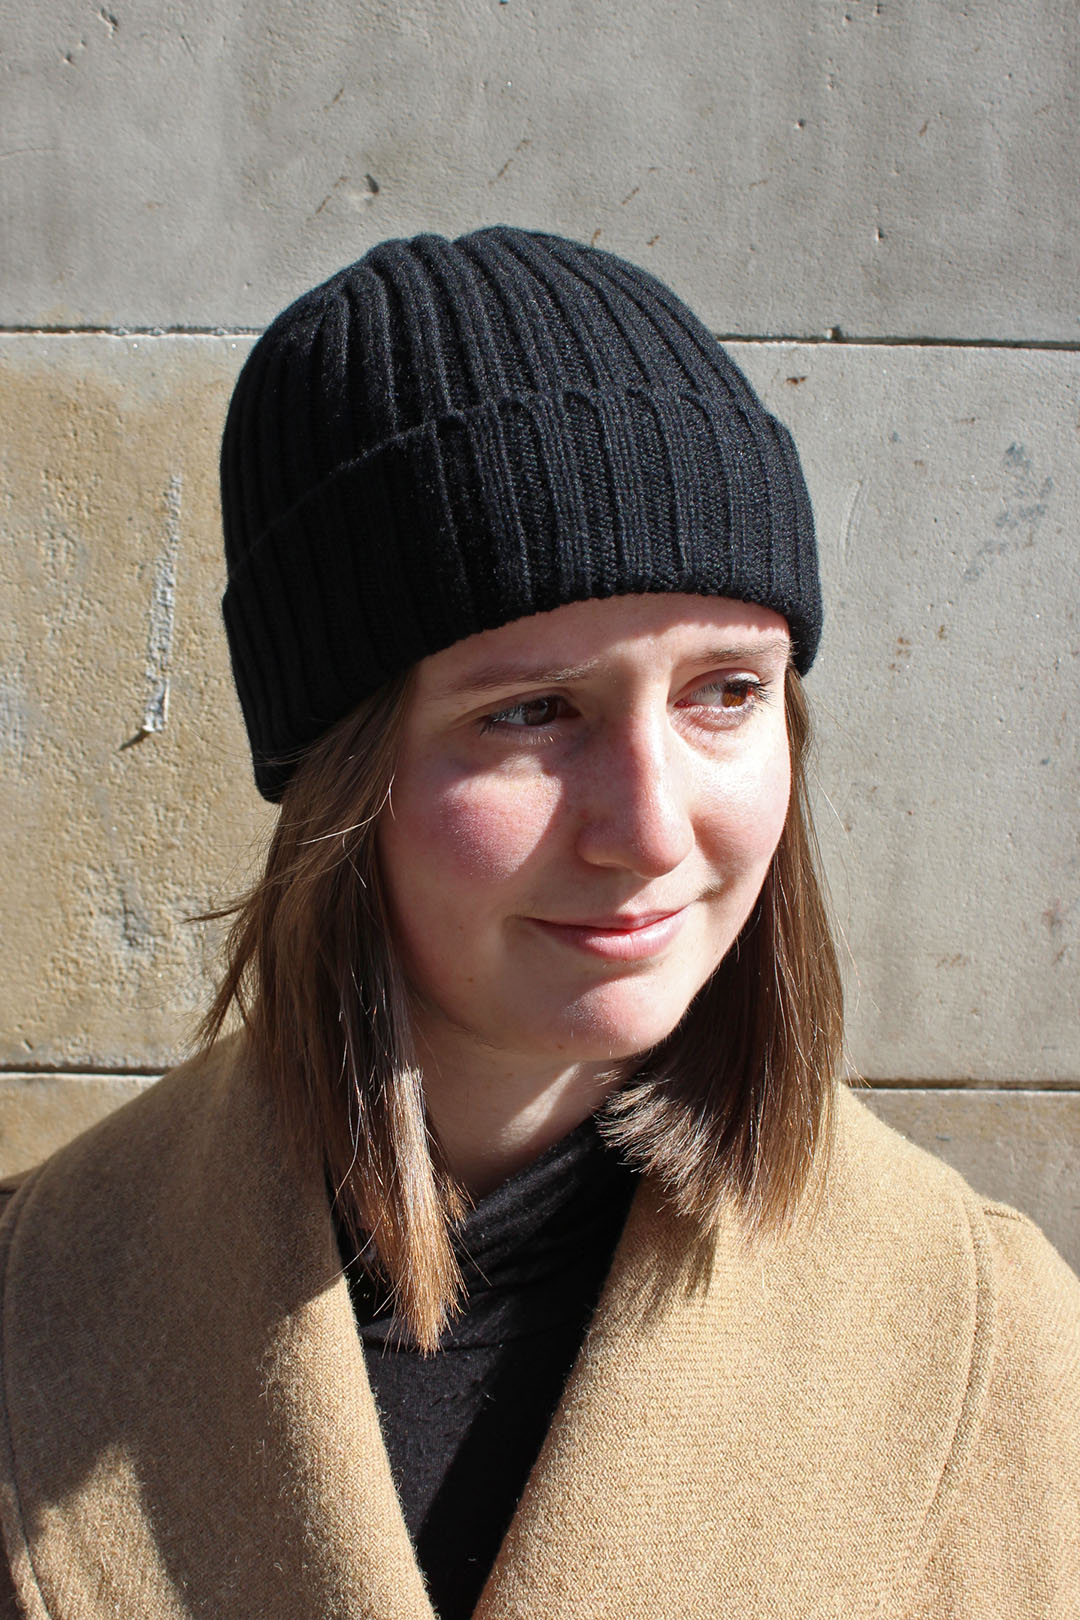 Knitted cairn cashmere hat in black, knitted in scotland